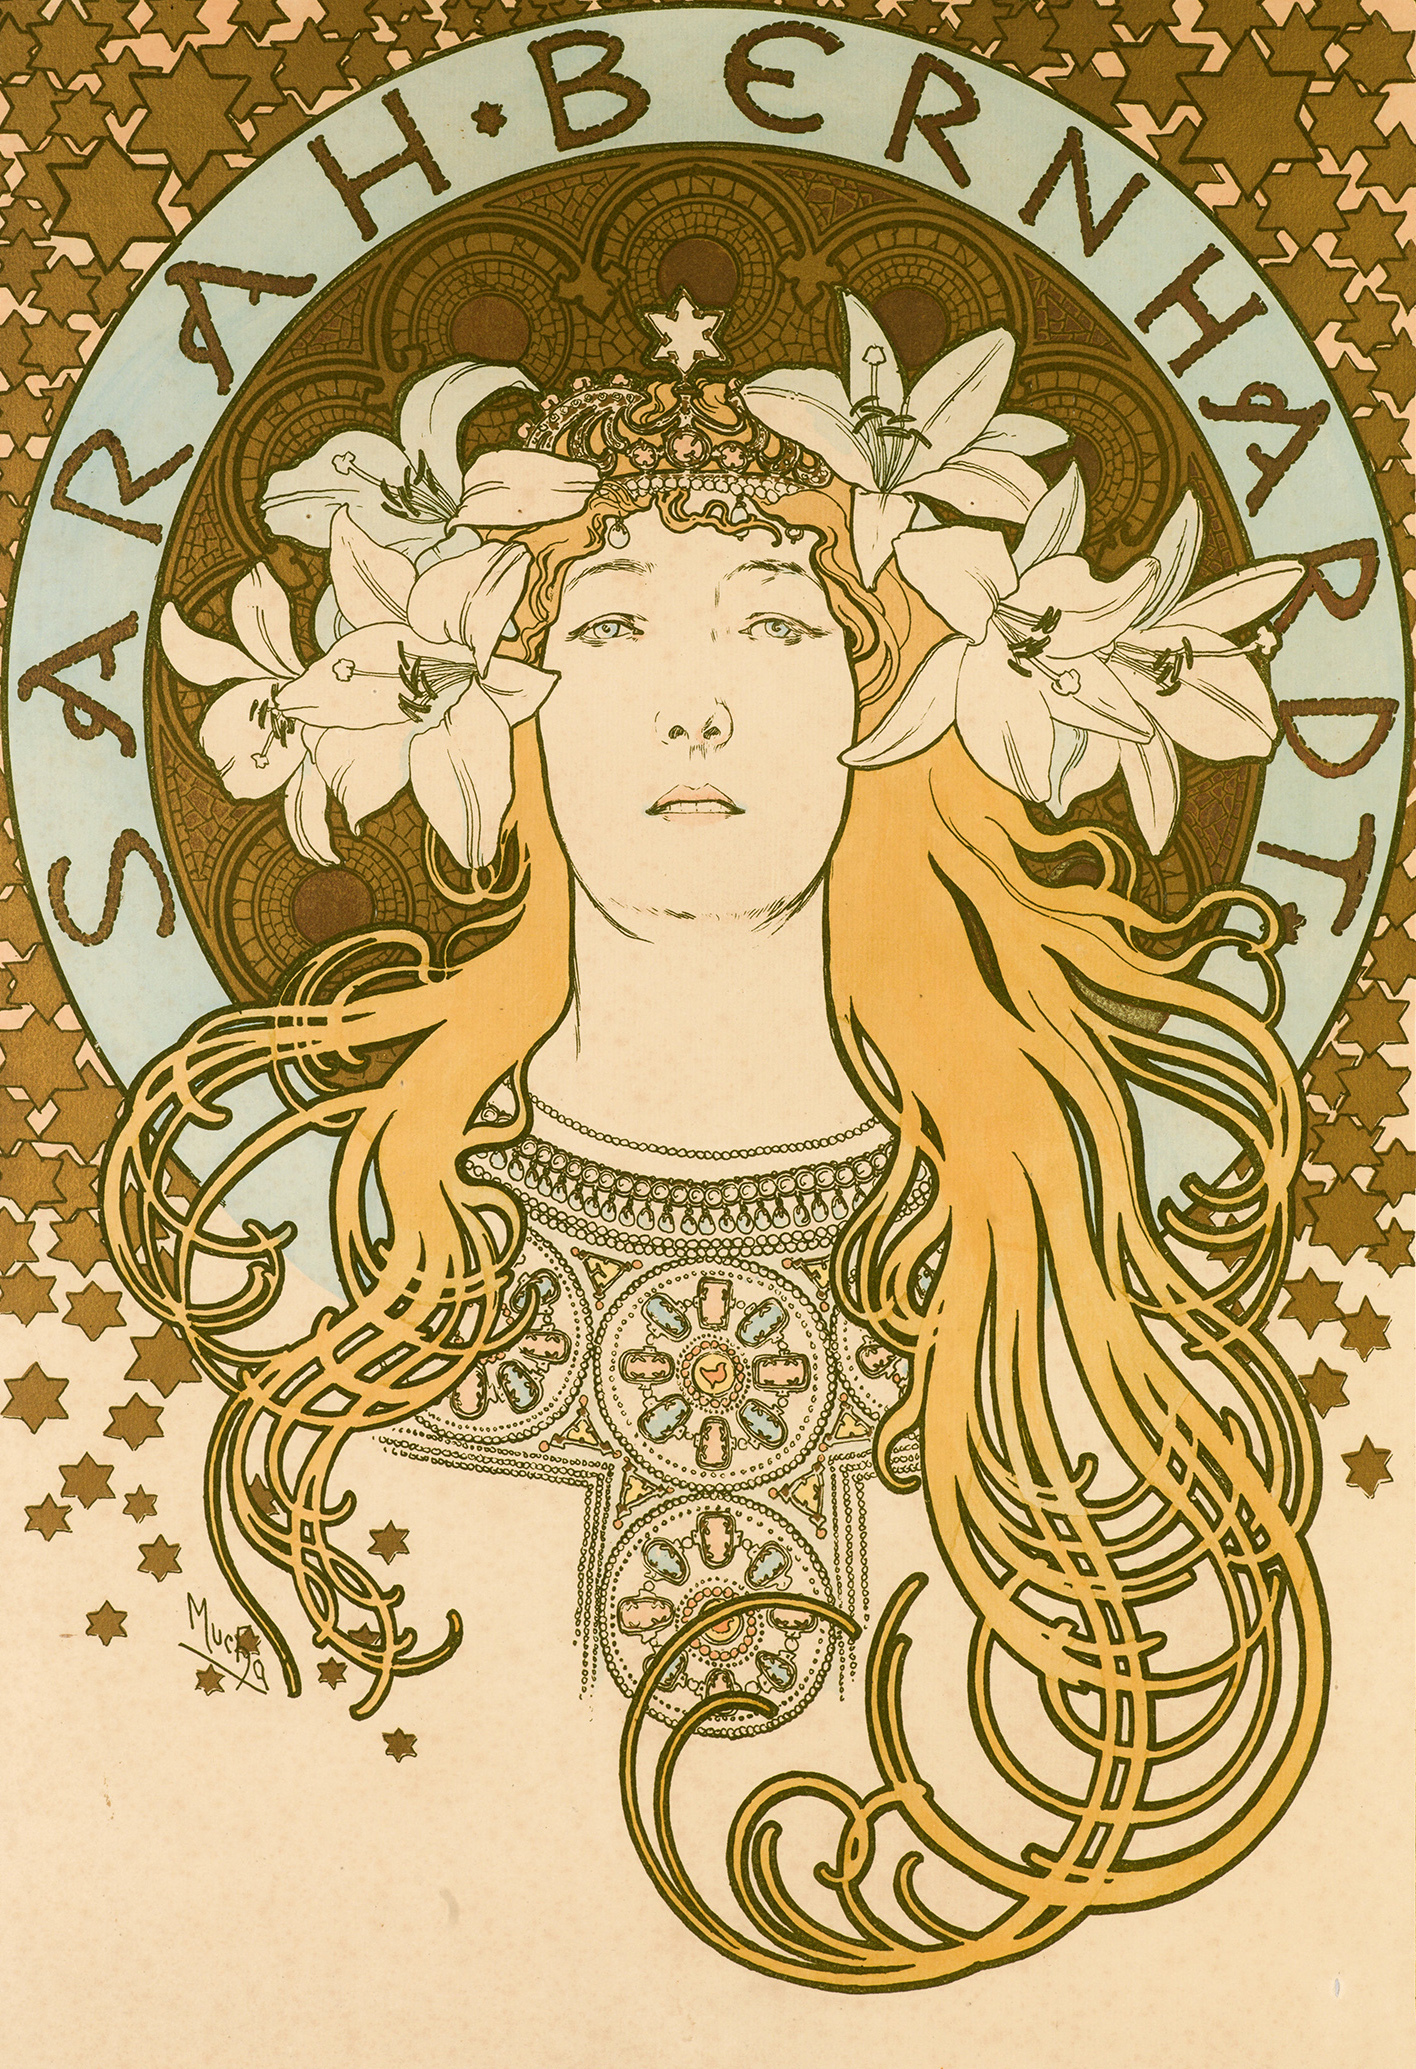 An illustrational poster of bronze stars surrounding the head of a woman with long hair and flowers.